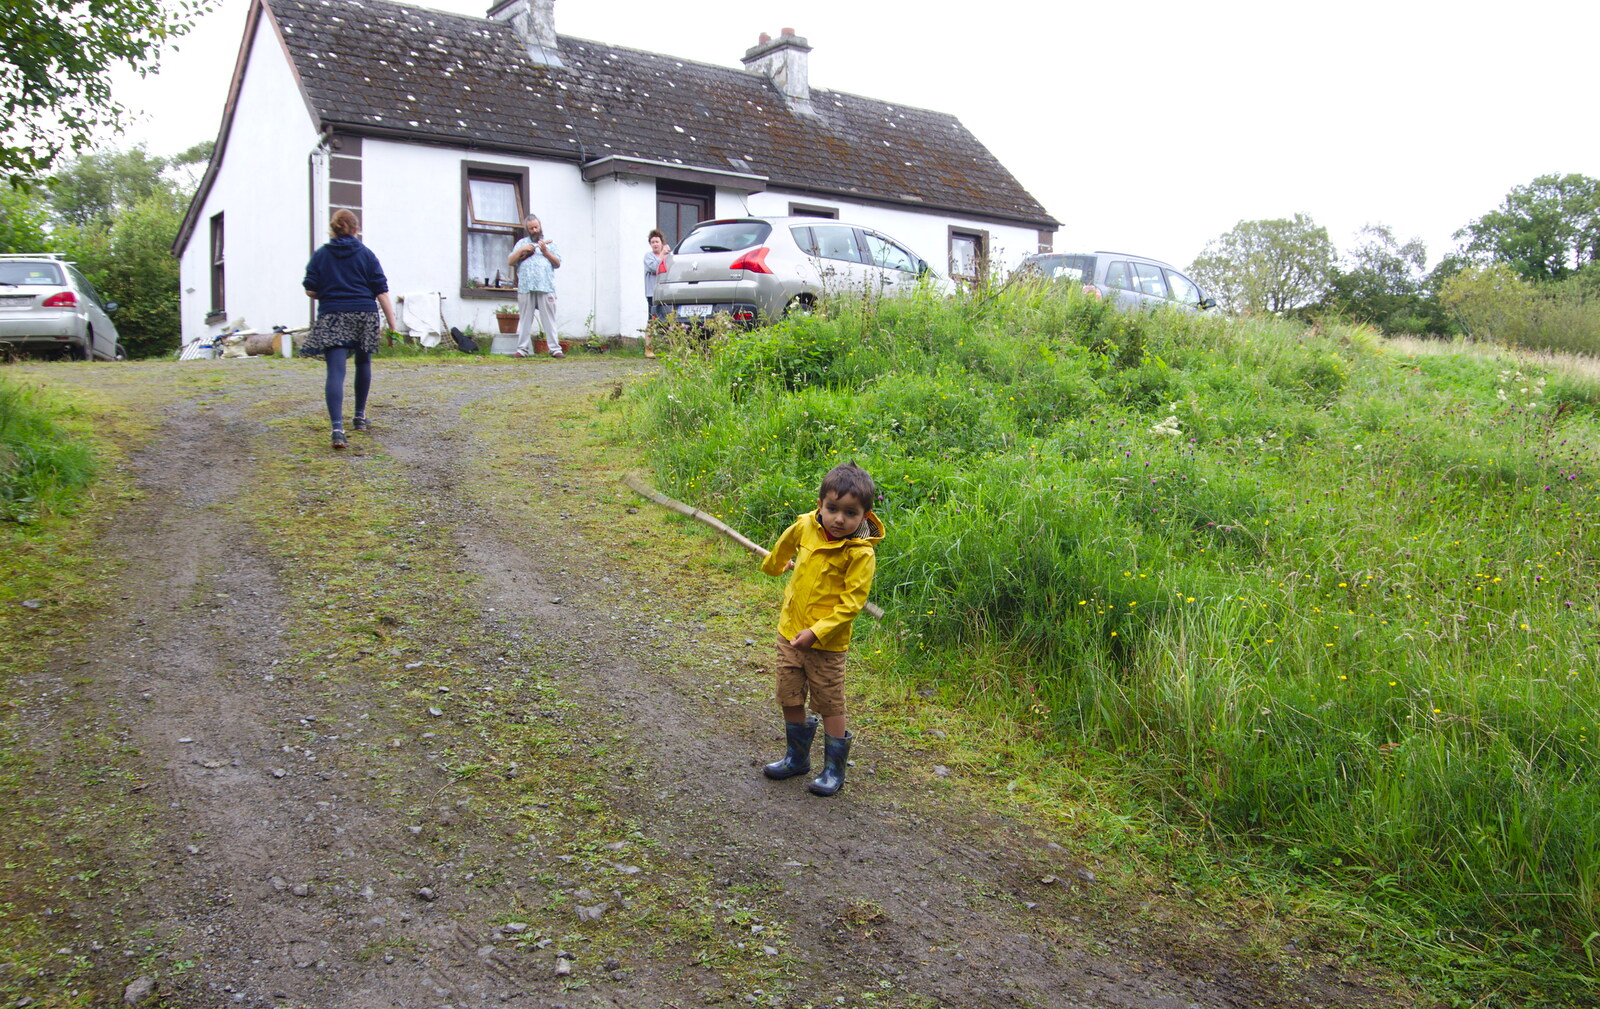 Nick has got a big stick from Glencar Waterfall and Parke's Castle, Kilmore, Leitrim, Ireland - 18th August 2019